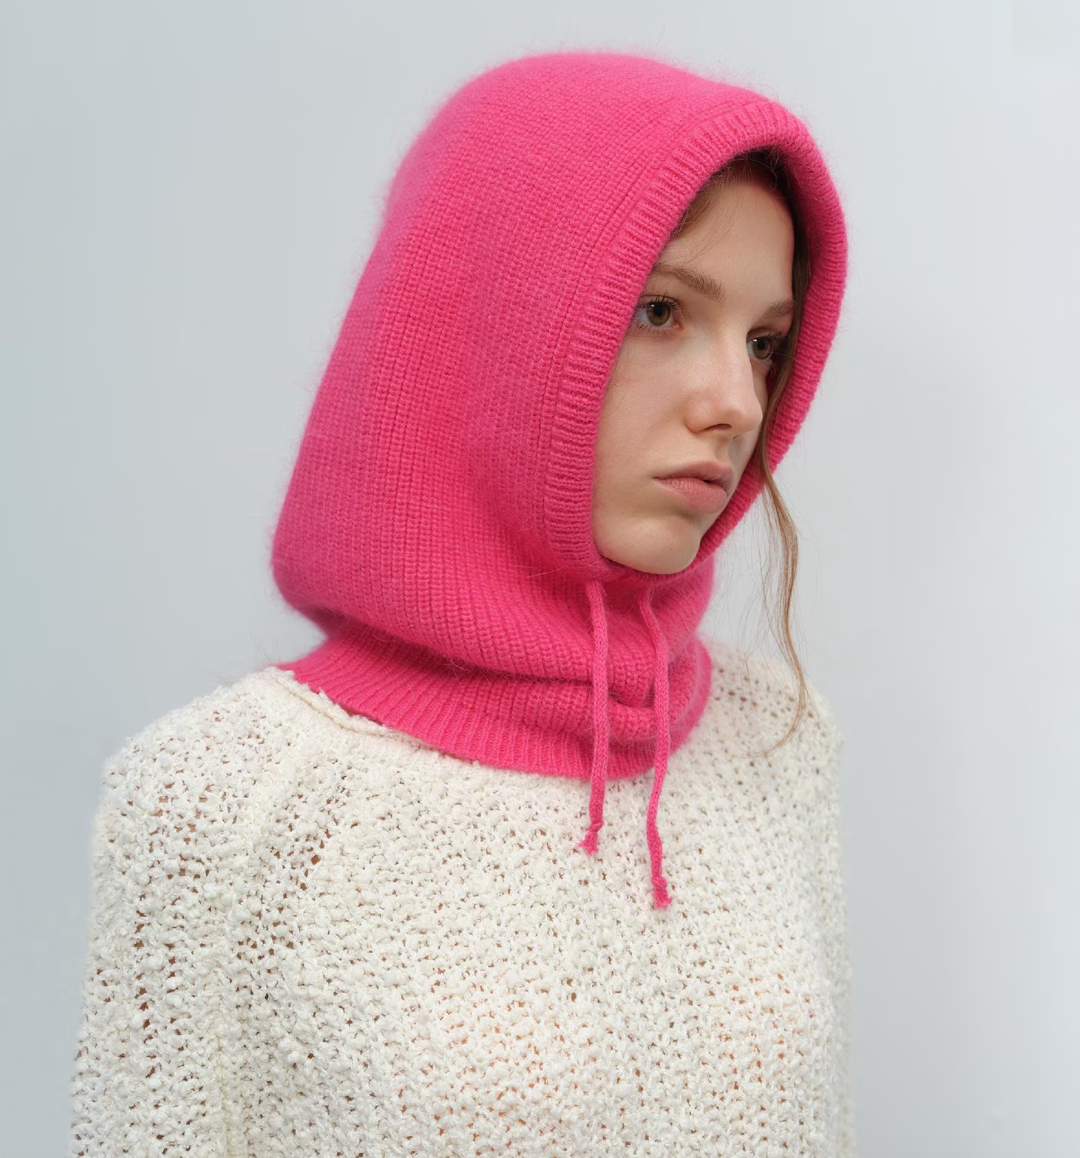 28 Pieces Of Clothing That Feel Like Wearing A Blanket